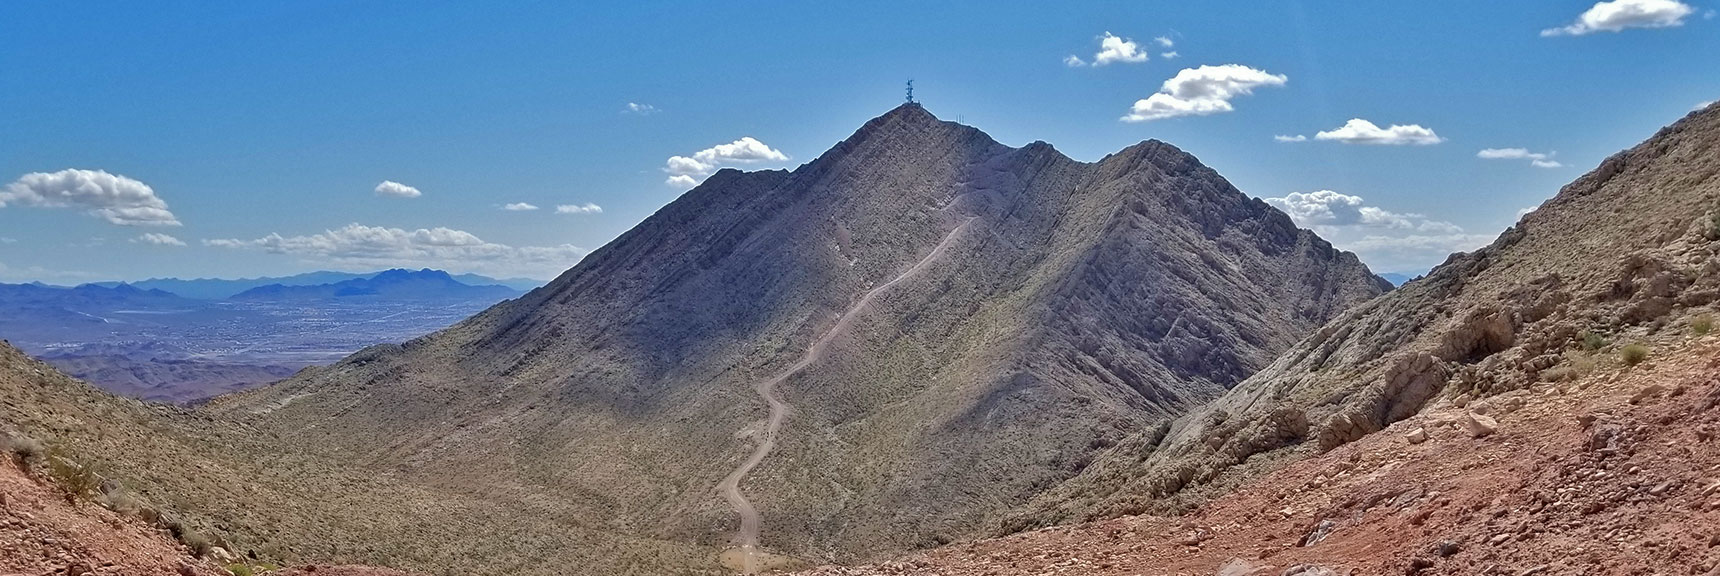 View of Second Summit of Frenchman Mountain, Nevada